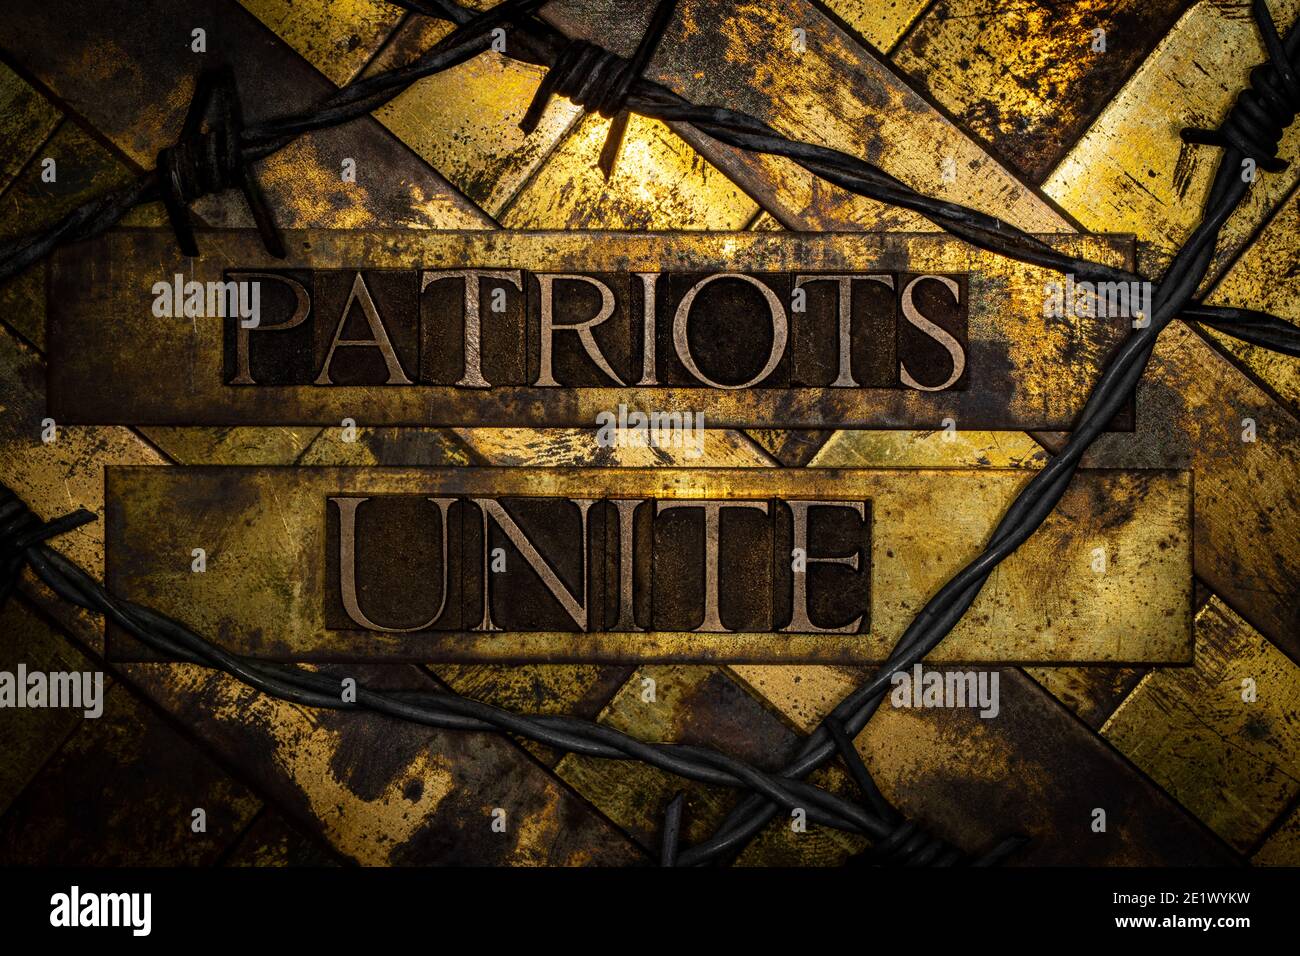 Patriots Unite text over copper 50 caliber bullet casings surrounded by barbed wire on grunge background Stock Photo